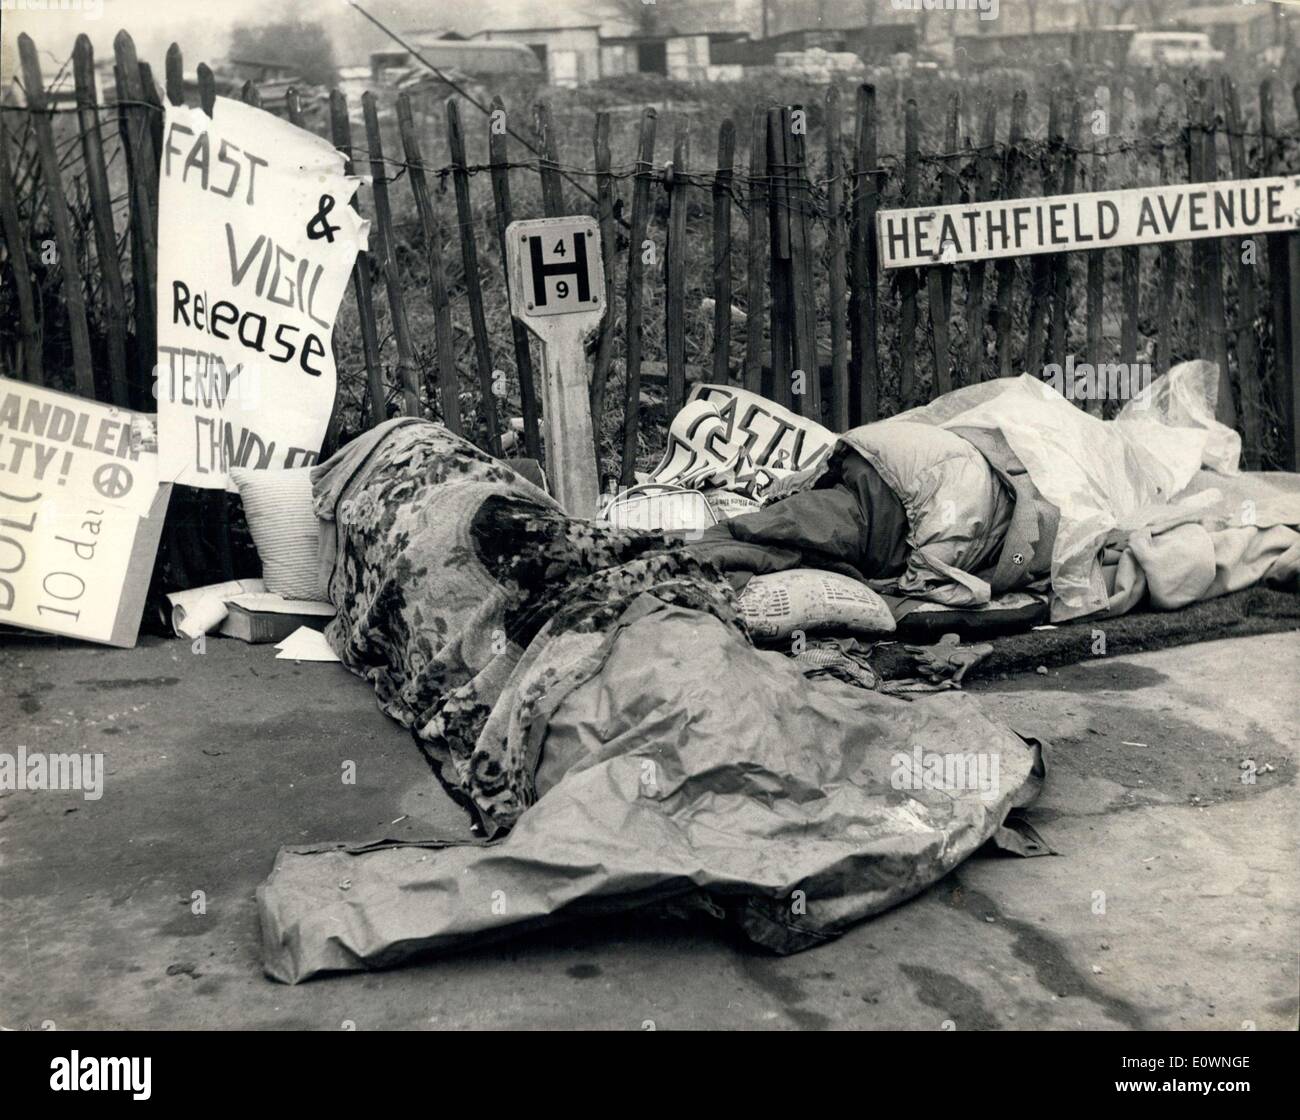 Dec. 23, 1963 - ''Fast To Death'' Outside Wandsworth Prison: Two members of the committee of X 100, George Cabutti and Zion Silverstein, are on the fifth day of a ''fast to death'' outside Wandsworth Prison where Terence Chandler has started to serve his sentence of nine months for his part as Field Secretary of the committee during their demonstrations during the Greek Royal visit. The two re protesting against the severity of the sentence. The committee have sent telegrams to the Queen and the Home Secretary advising them of the fast Stock Photo